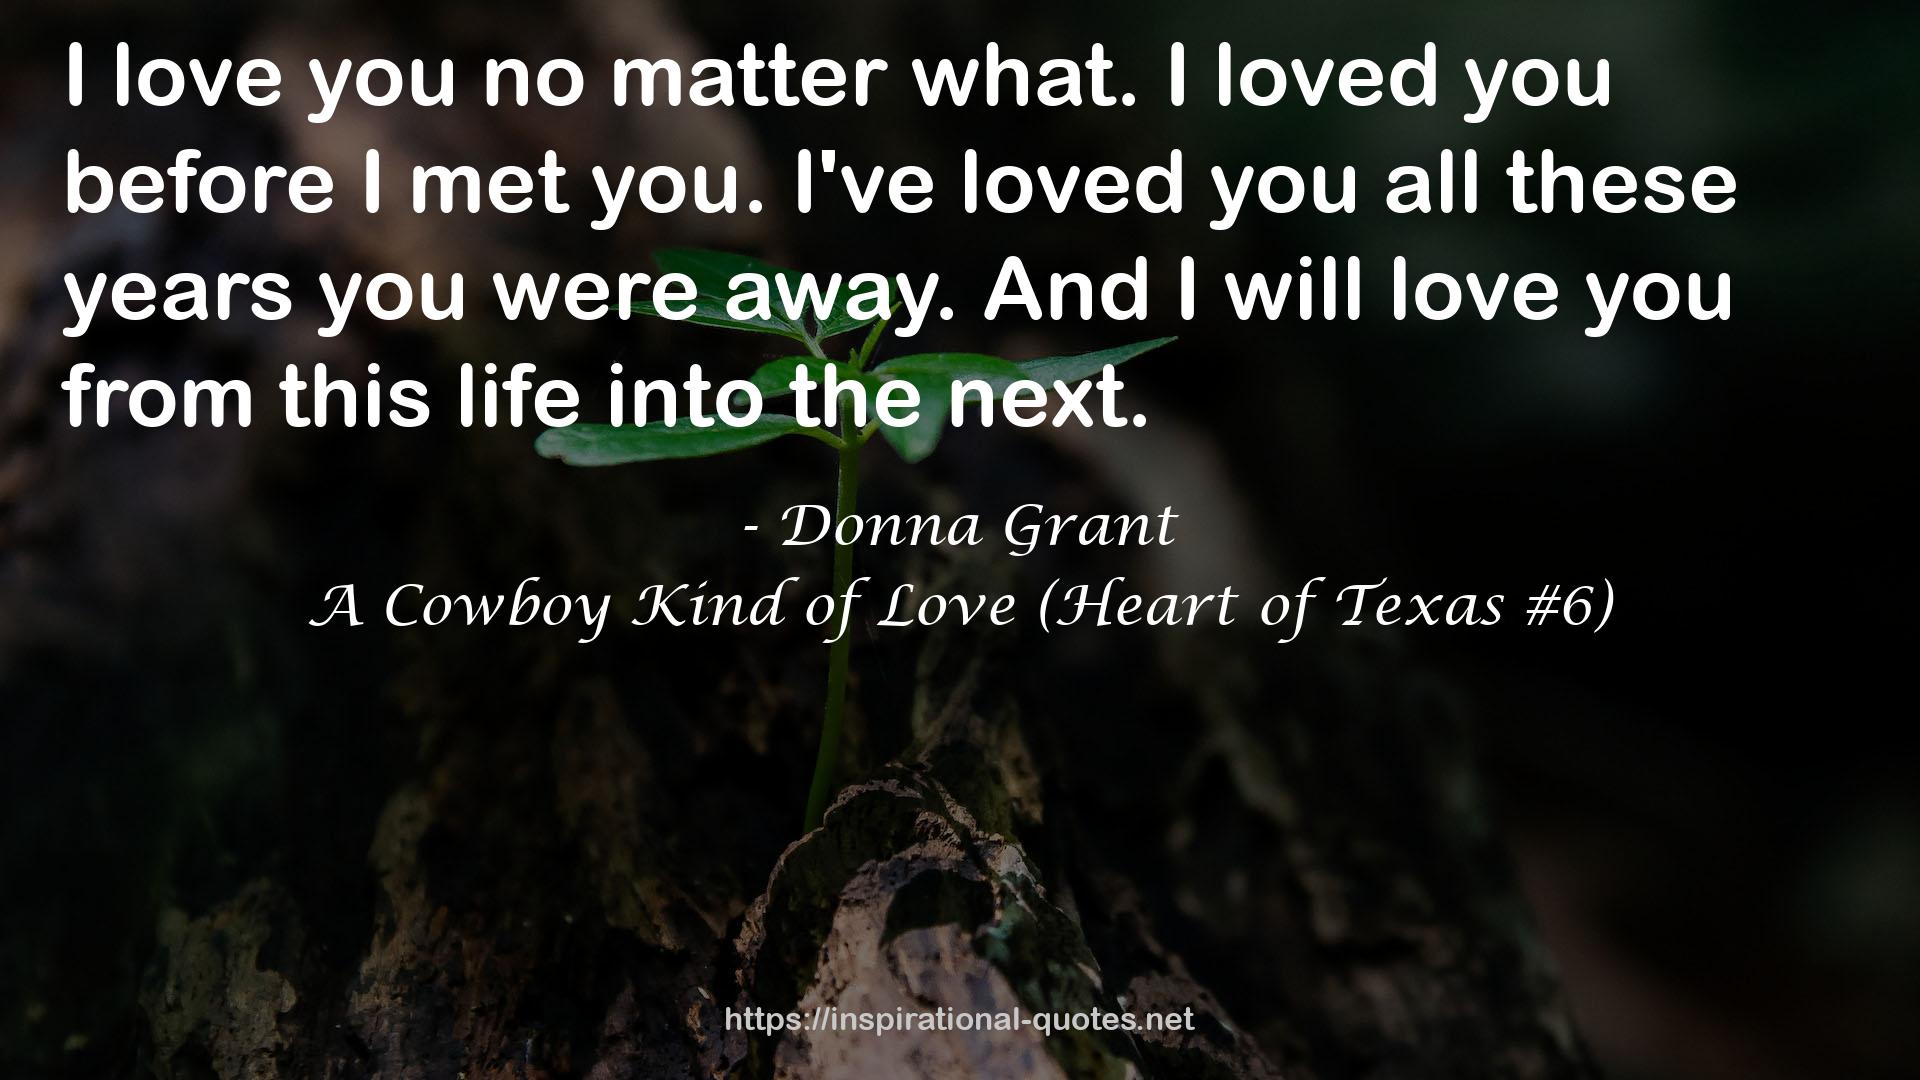 A Cowboy Kind of Love (Heart of Texas #6) QUOTES